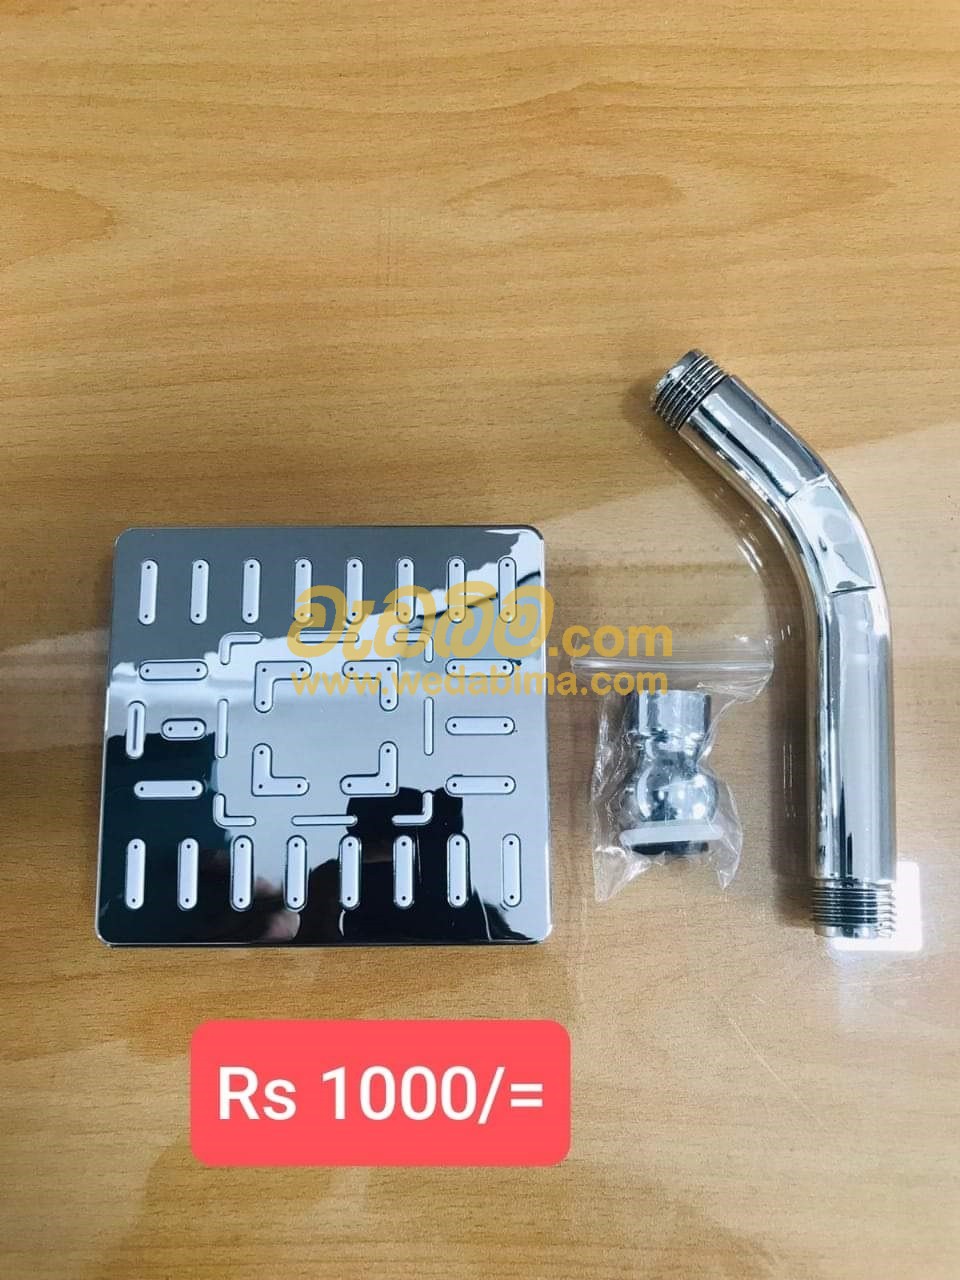 Cover image for Jet Shower for sale price colombo